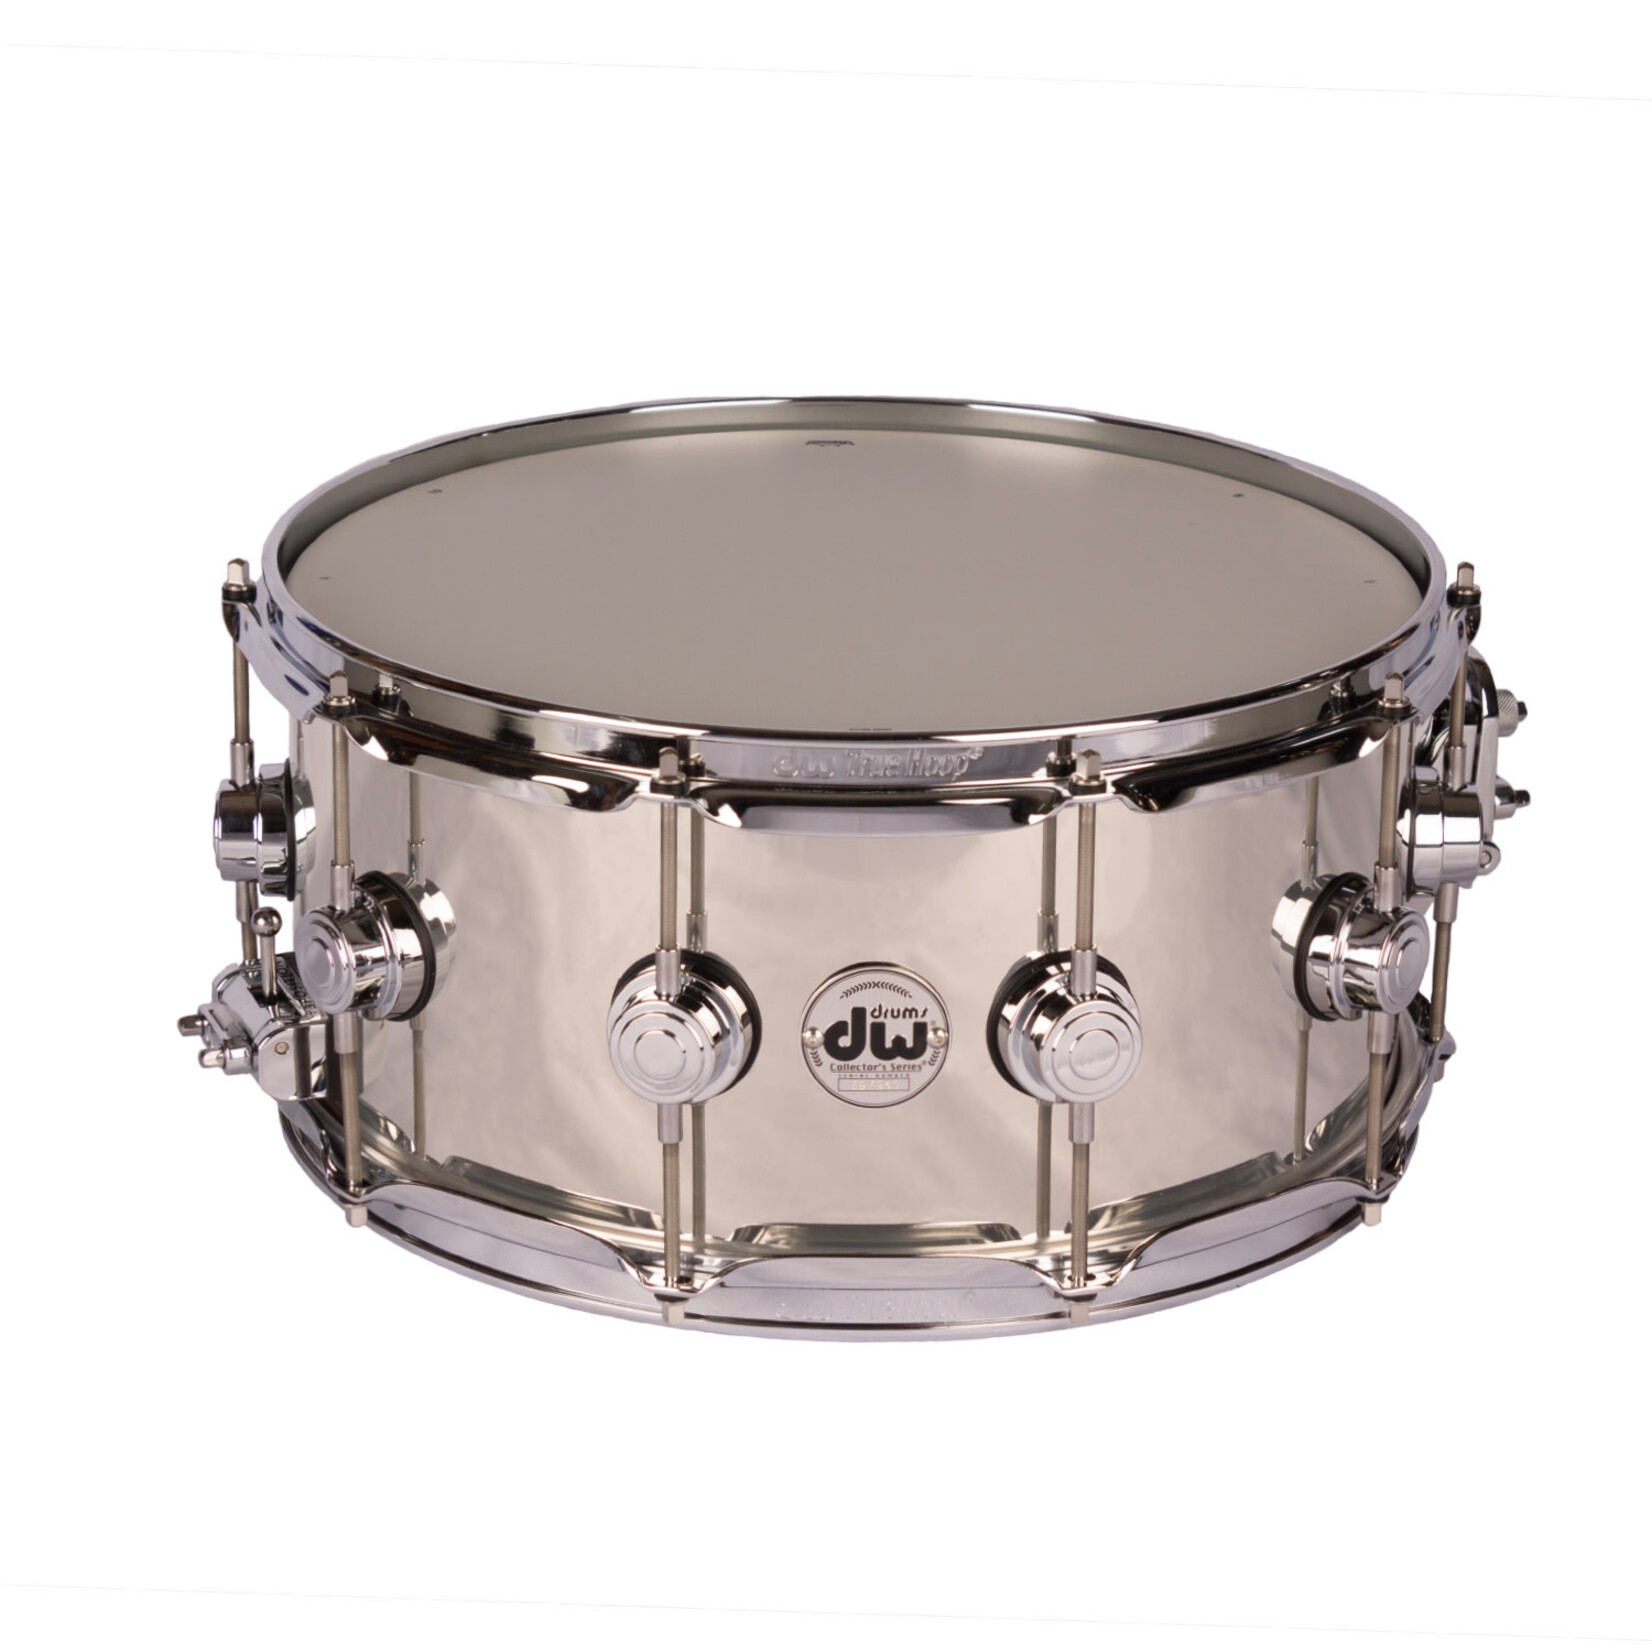 DW DW Collector's 6.5x14" Nickel Over Brass Snare Drum with Chrome Hardware DRVK6514SVC